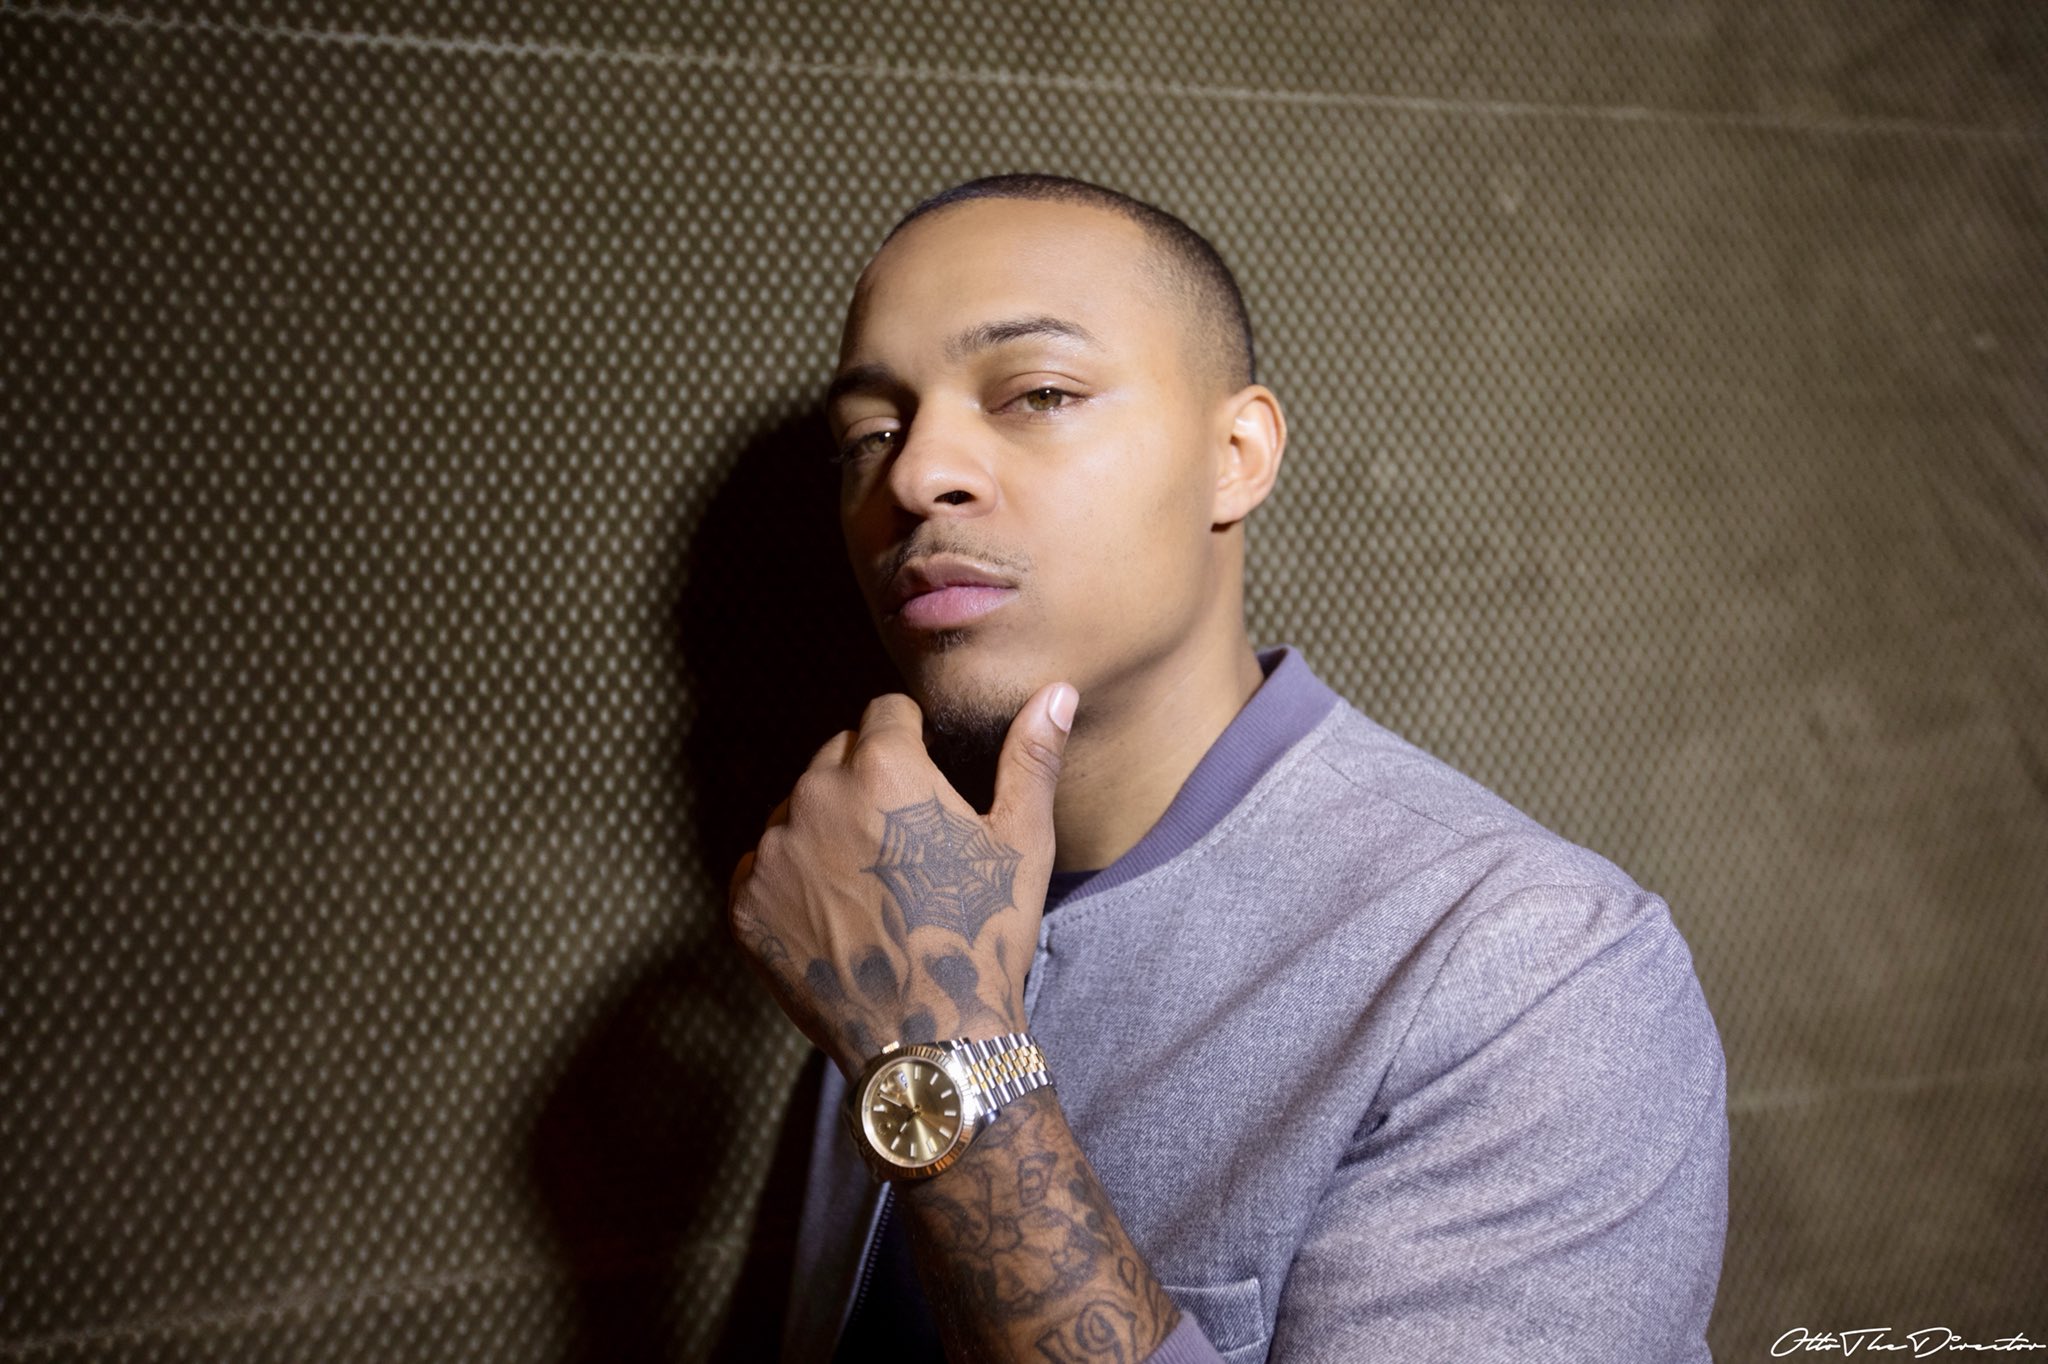 Bow Wow on Twitter.